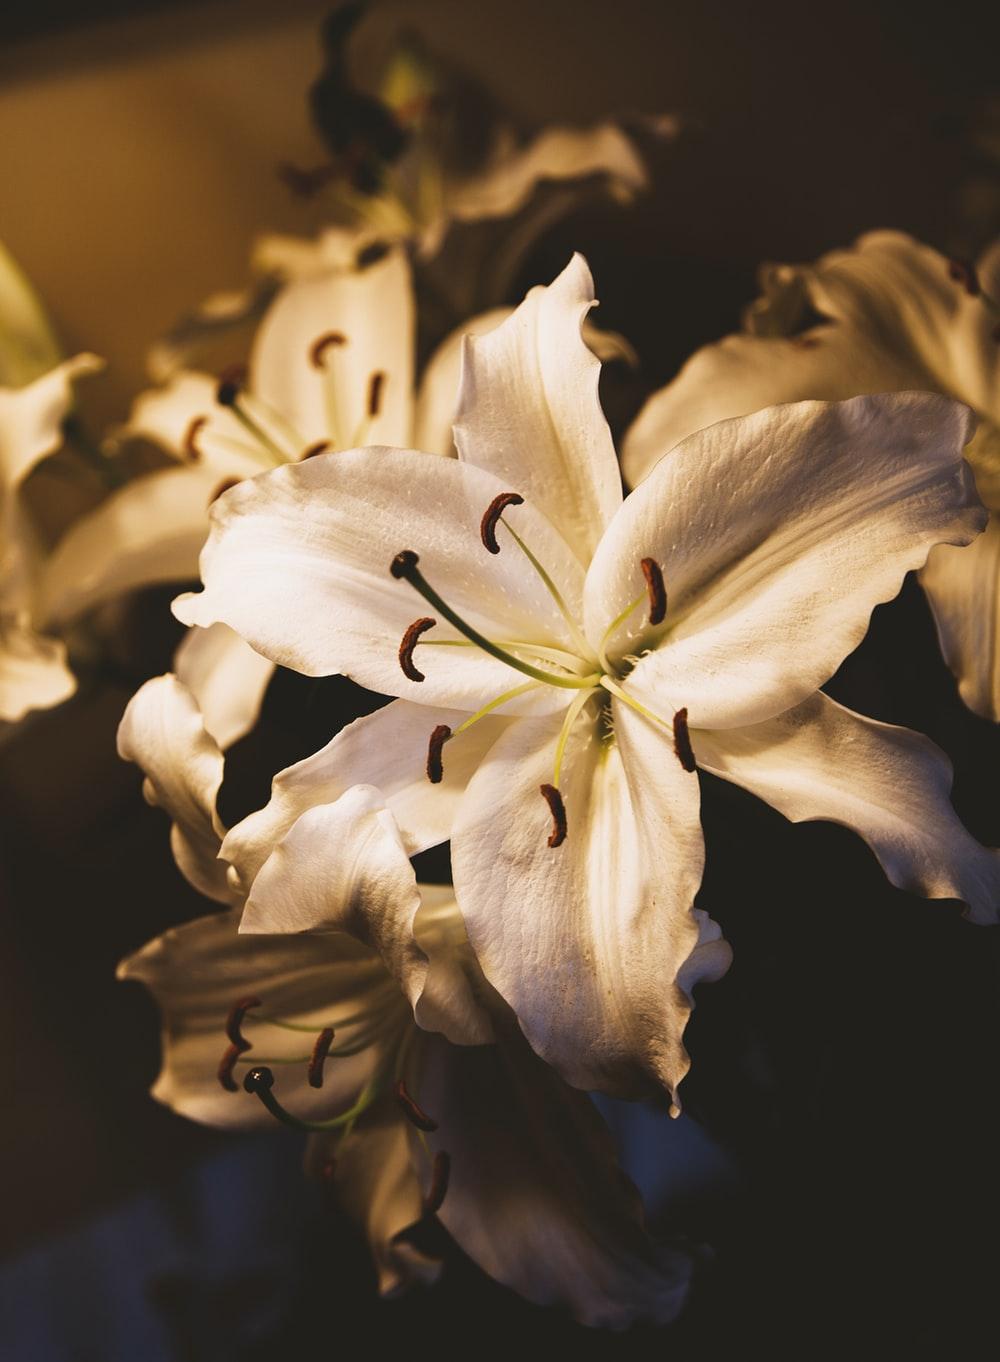 White Lily Picture. Download Free Image